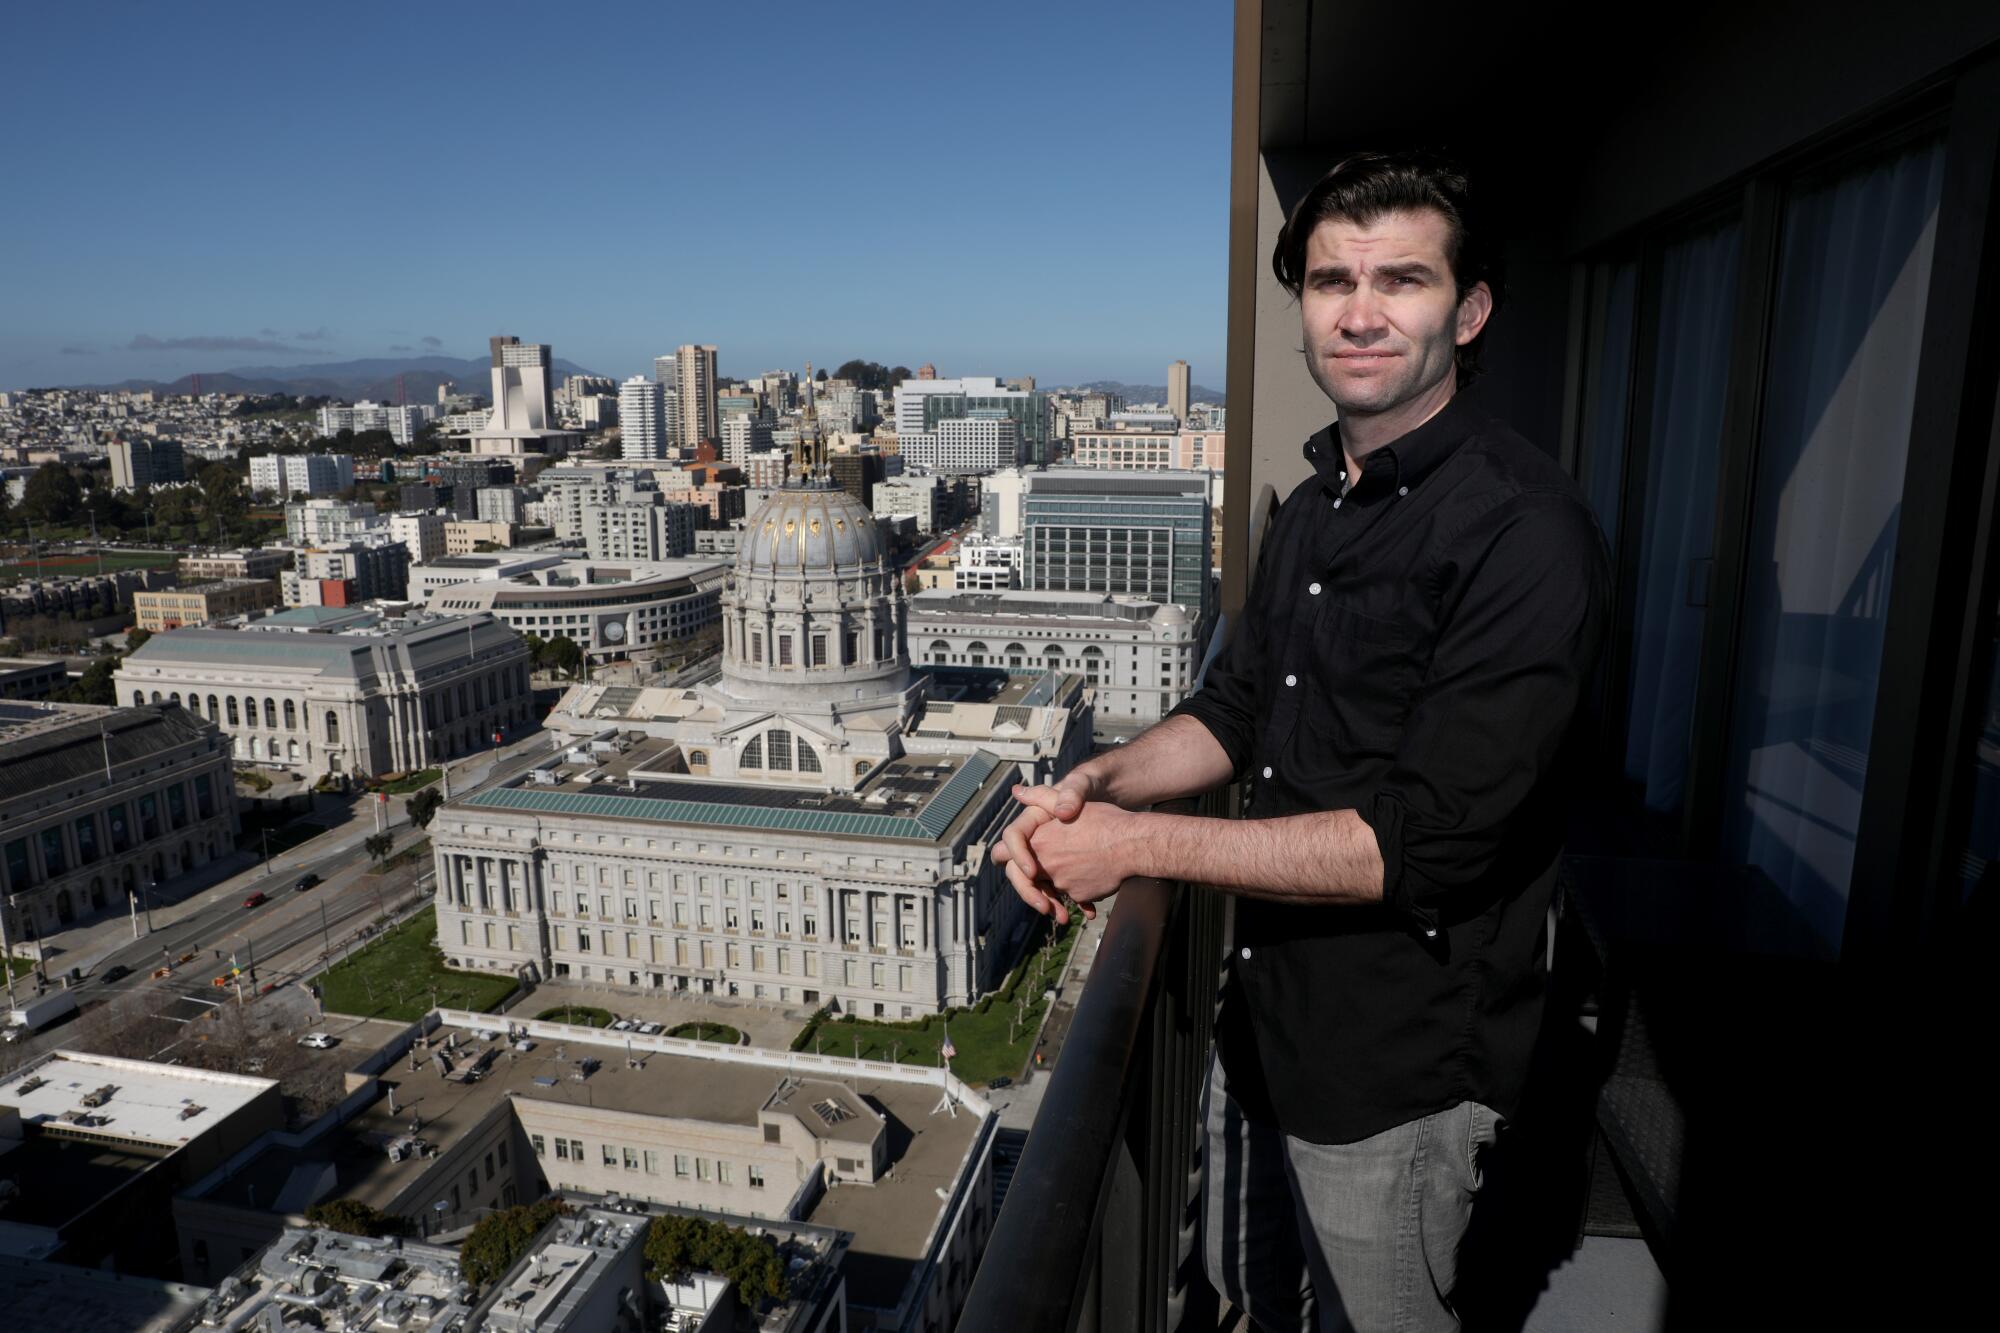 Scott Simmons at his one bedroom apartment balcony overlooking City Hall and other buildings in San Francisco